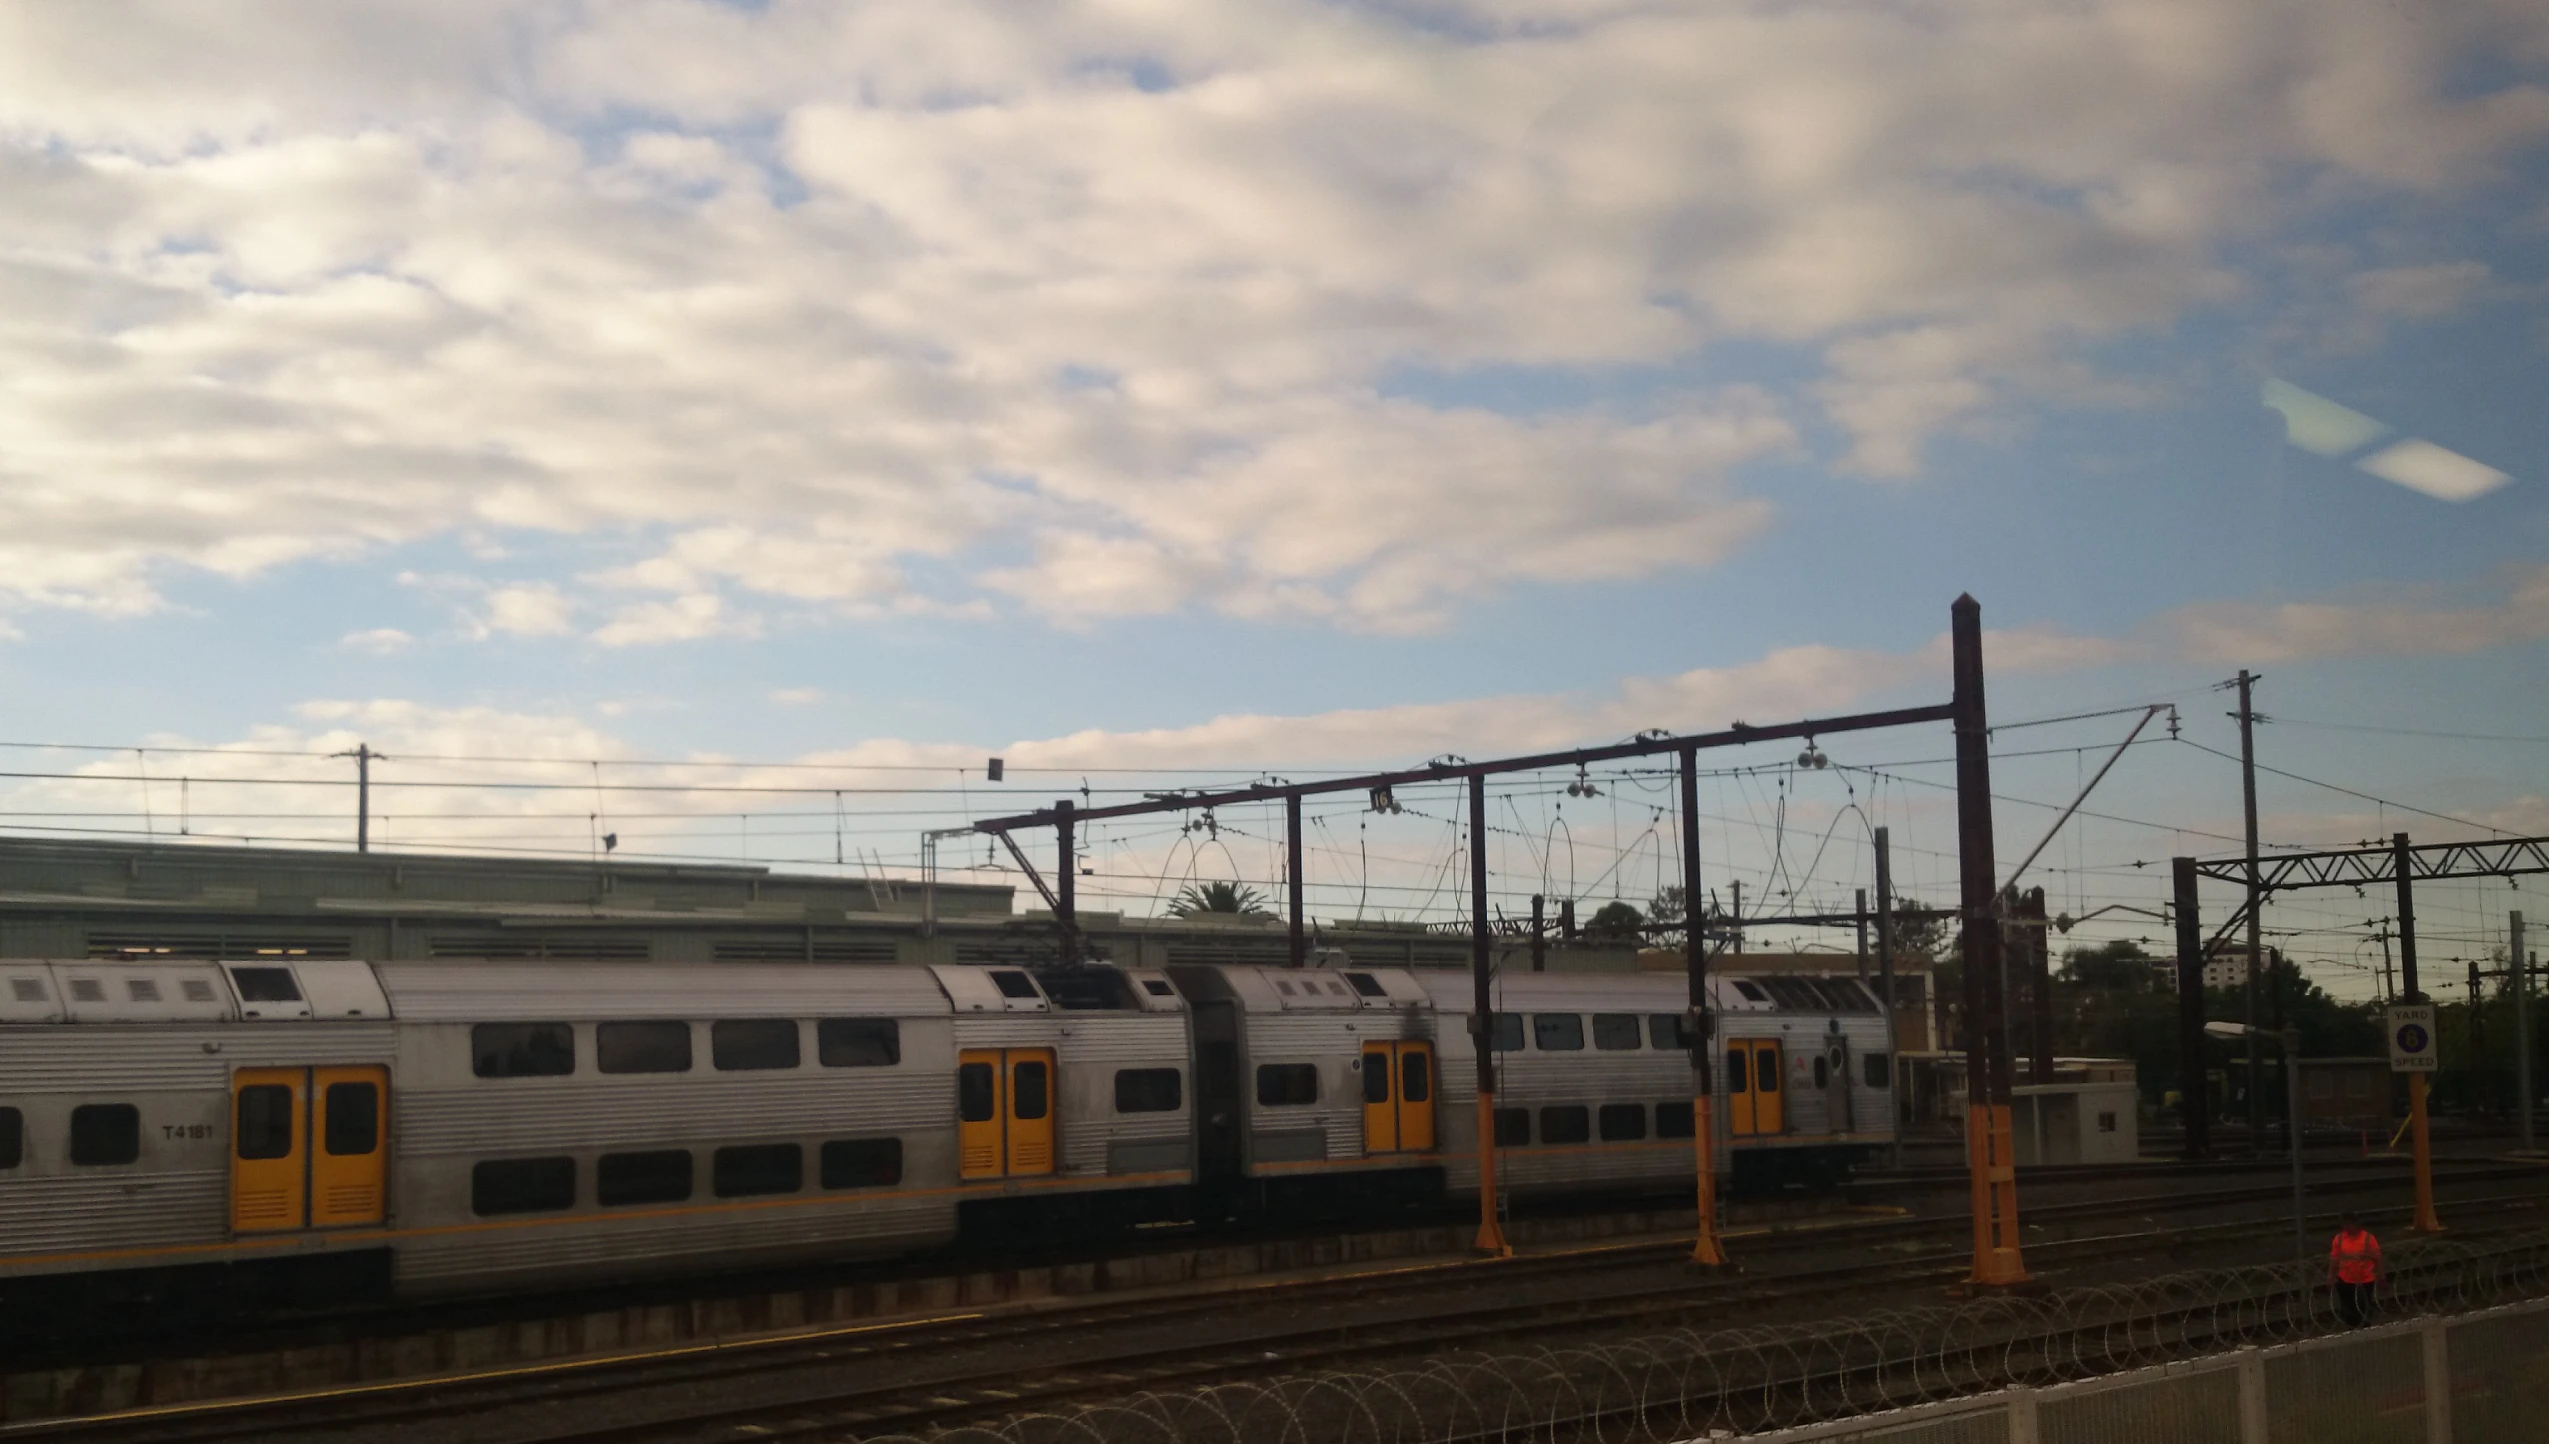 three passenger trains with yellow doors stand on the tracks